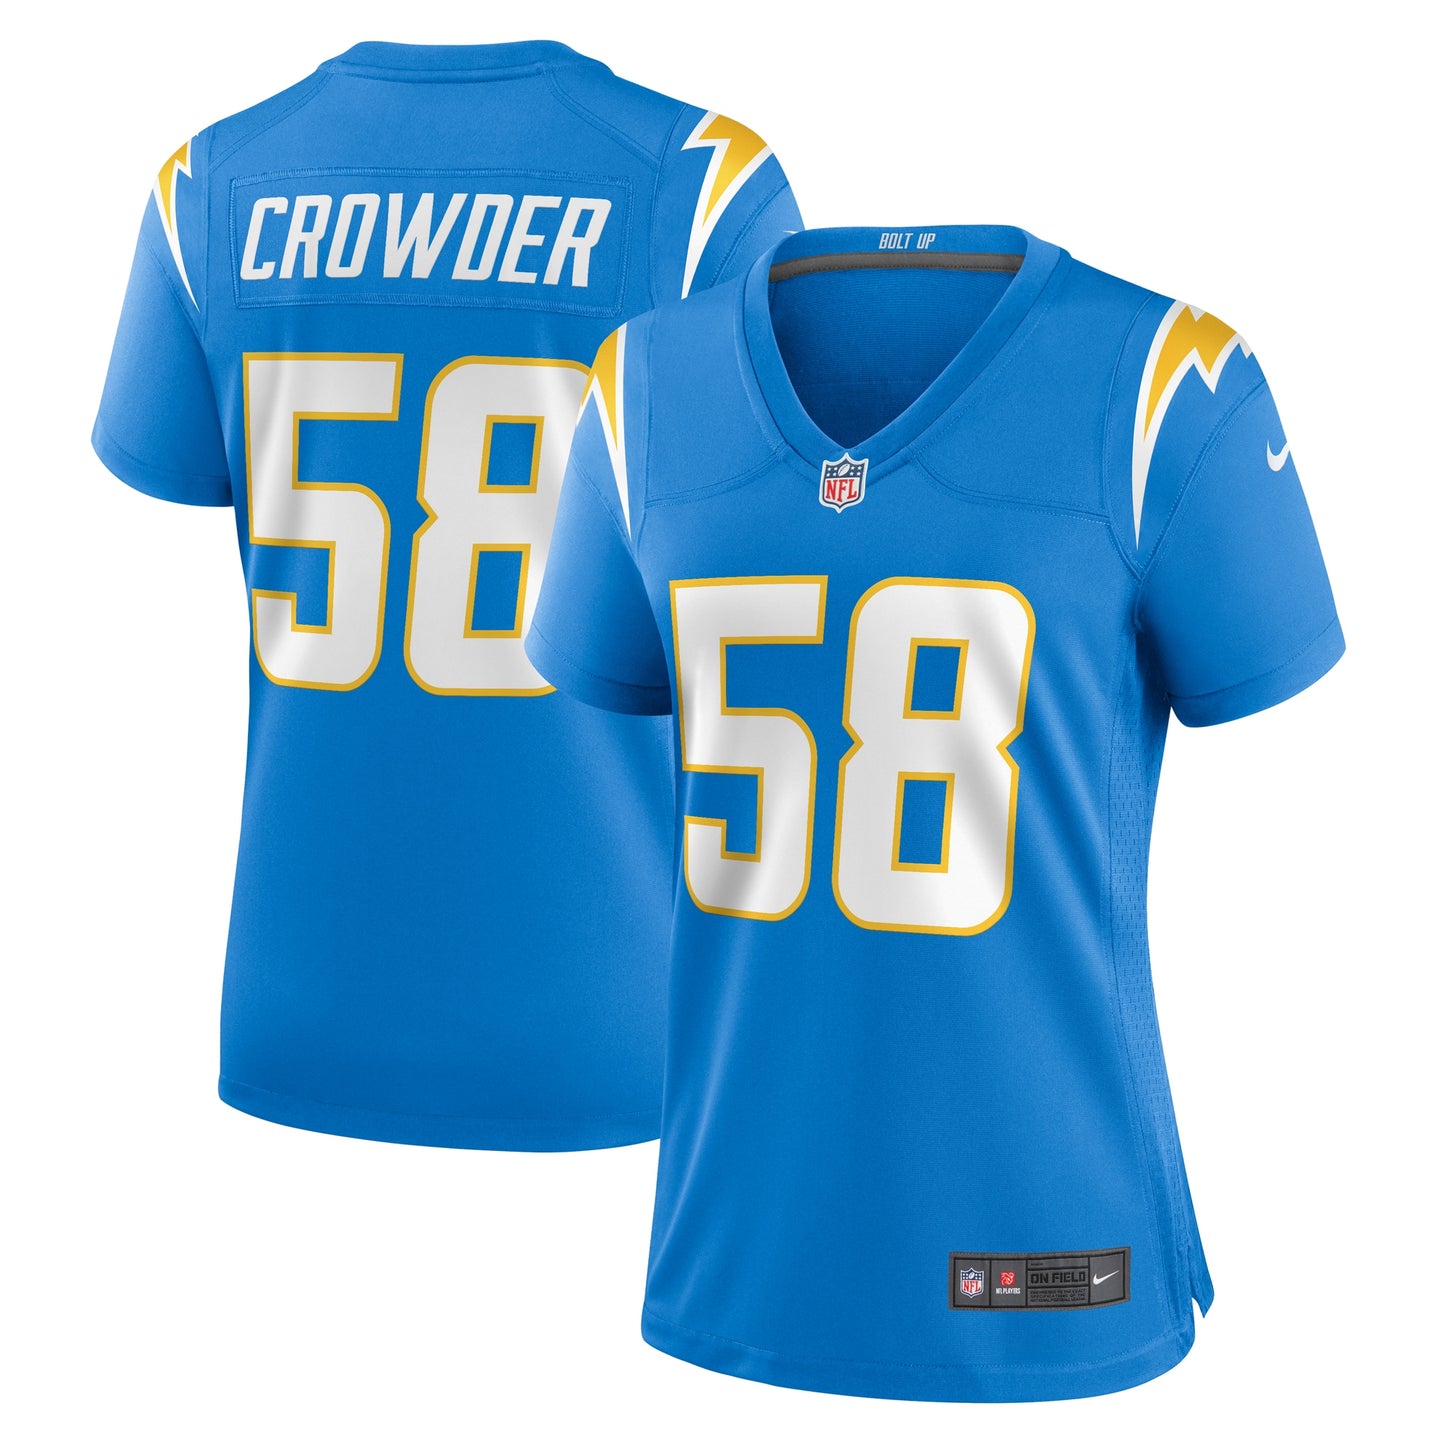 Tae Crowder Los Angeles Chargers Nike Women's Team Game Jersey - Powder Blue